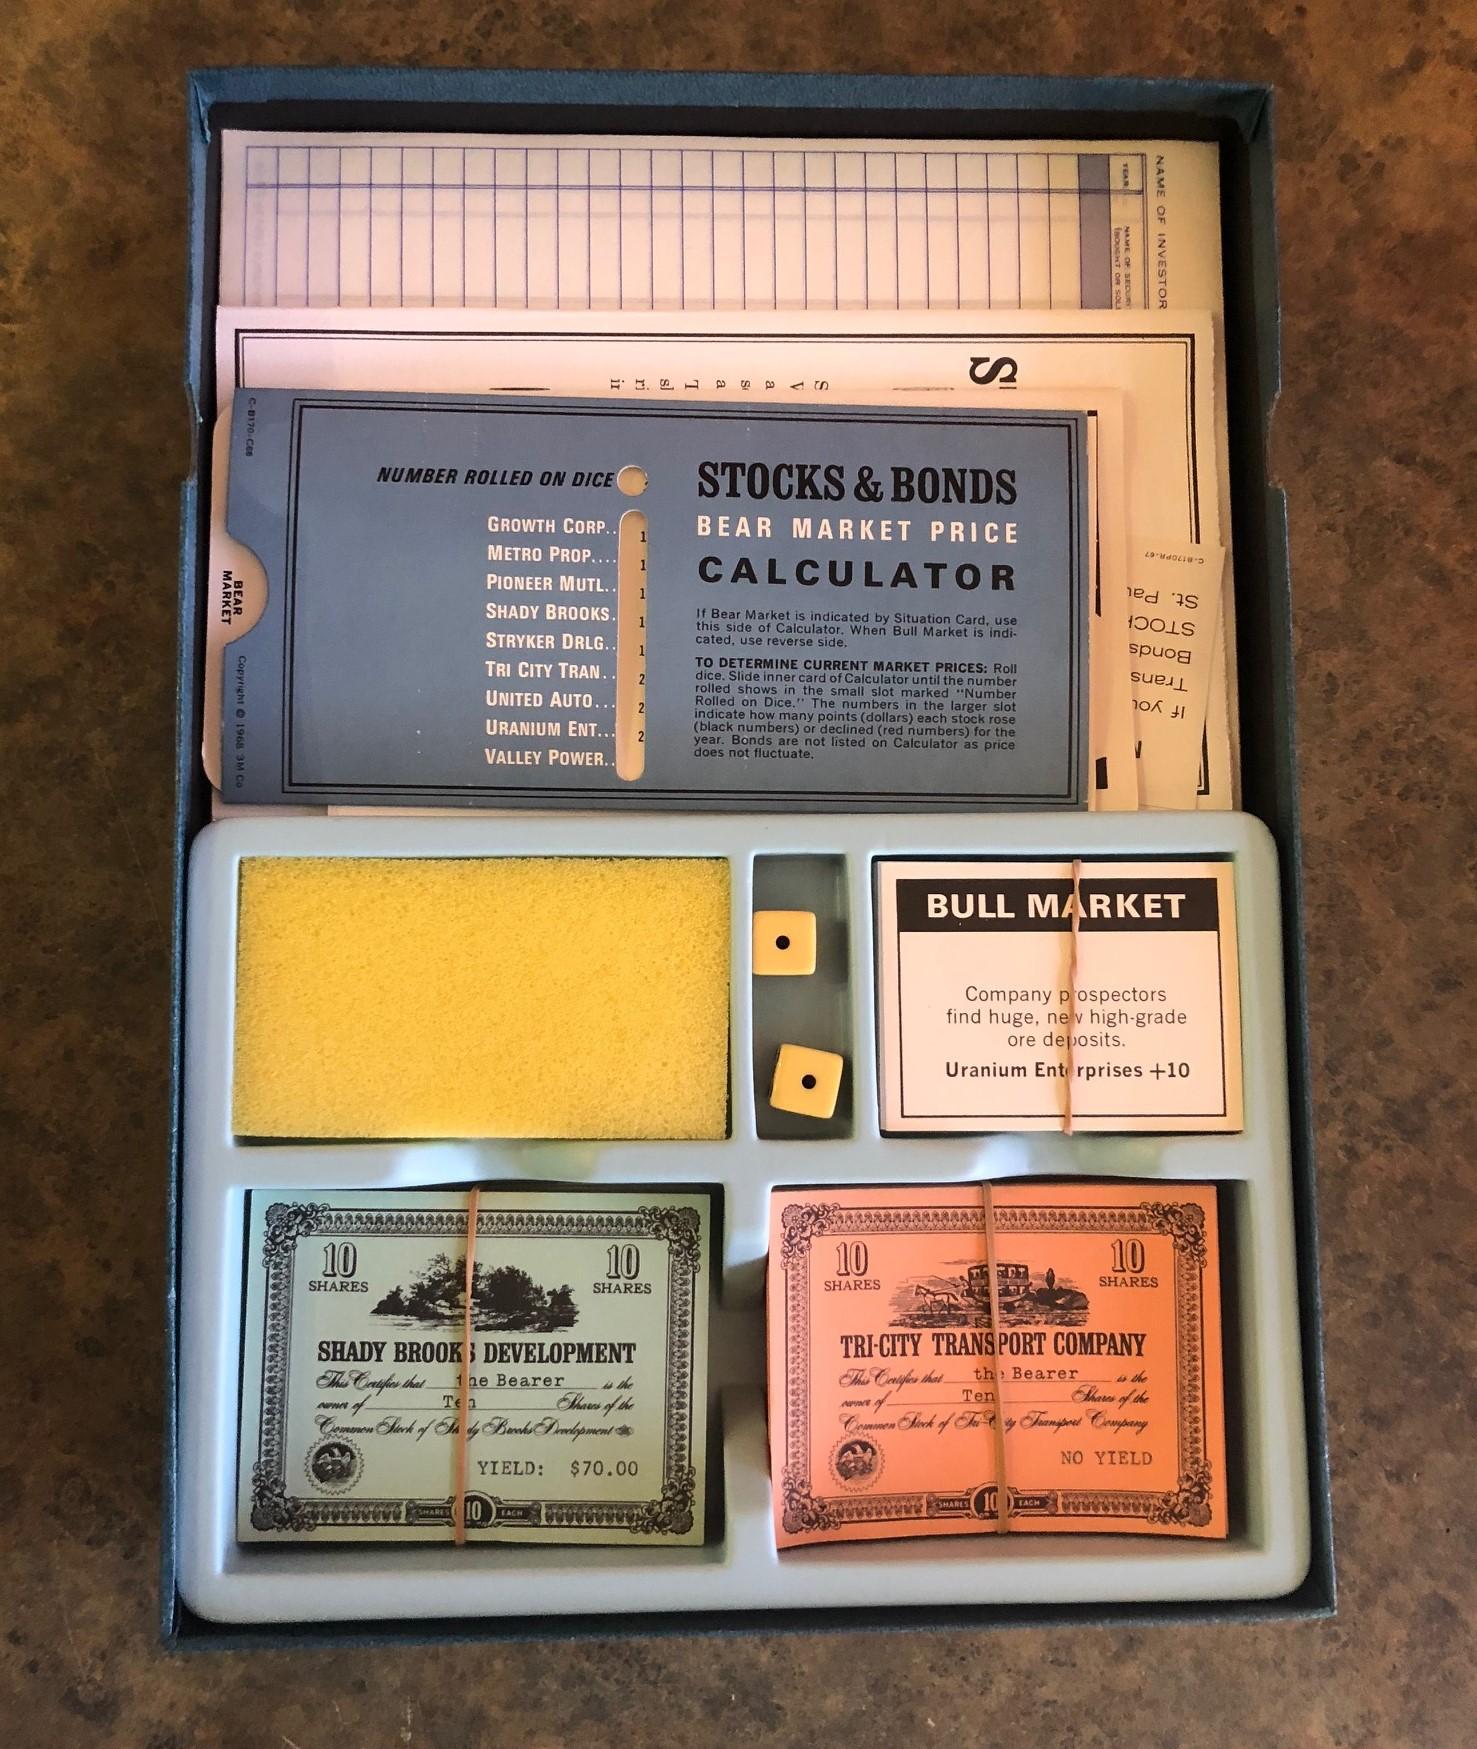 Midcentury stocks and Bonds board game by 3M, circa 1964. This set is in excellent condition and appears to have never been played. Stocks & Bonds is a 